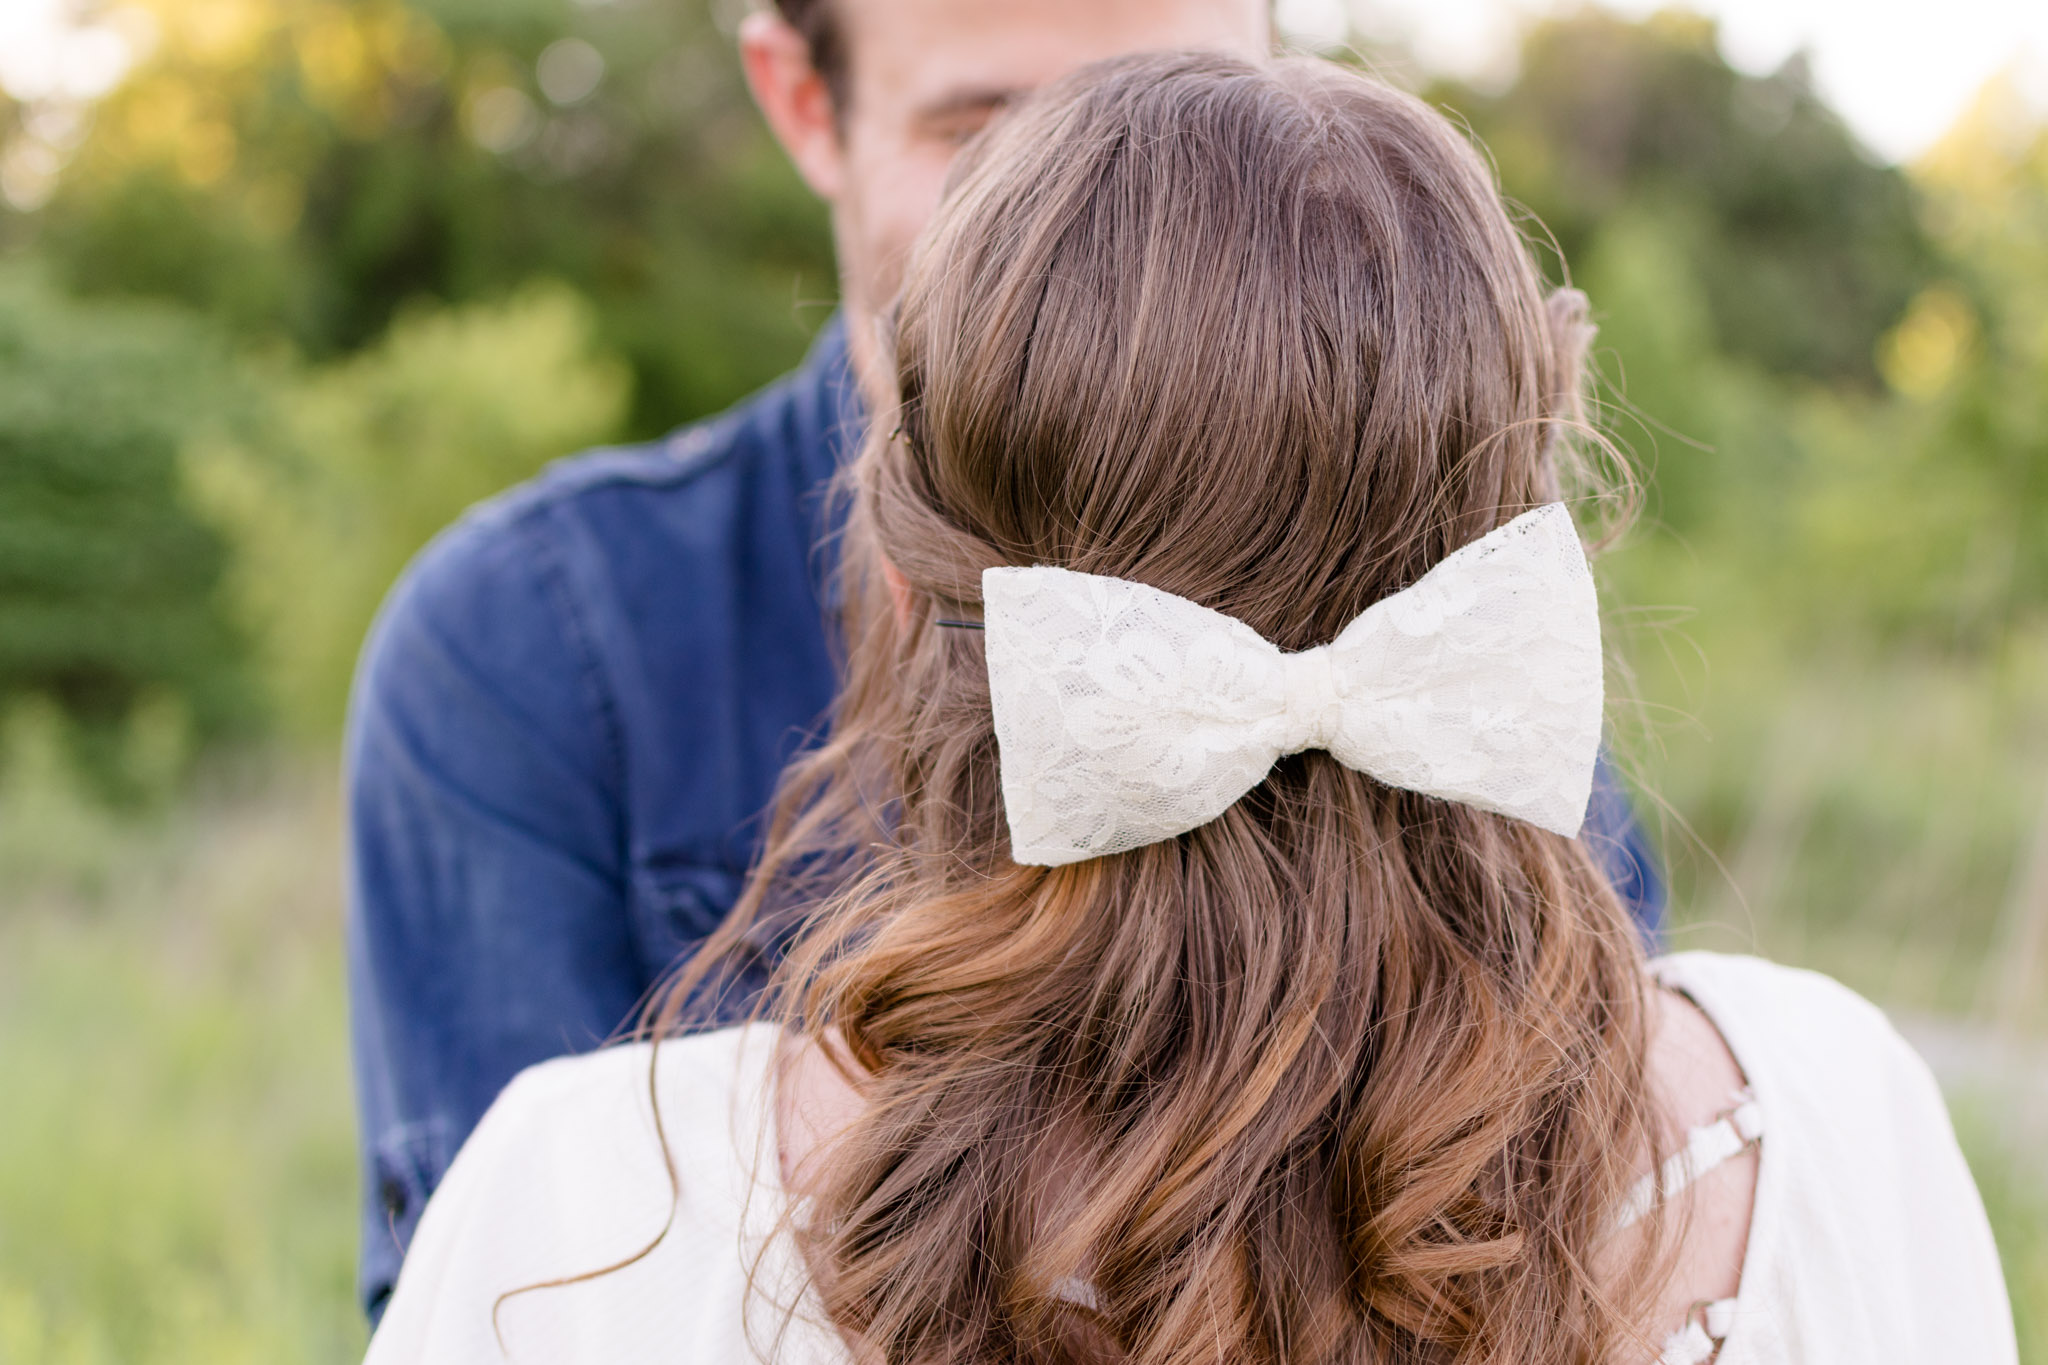 Bride-to-be wears a bow to her engagement session